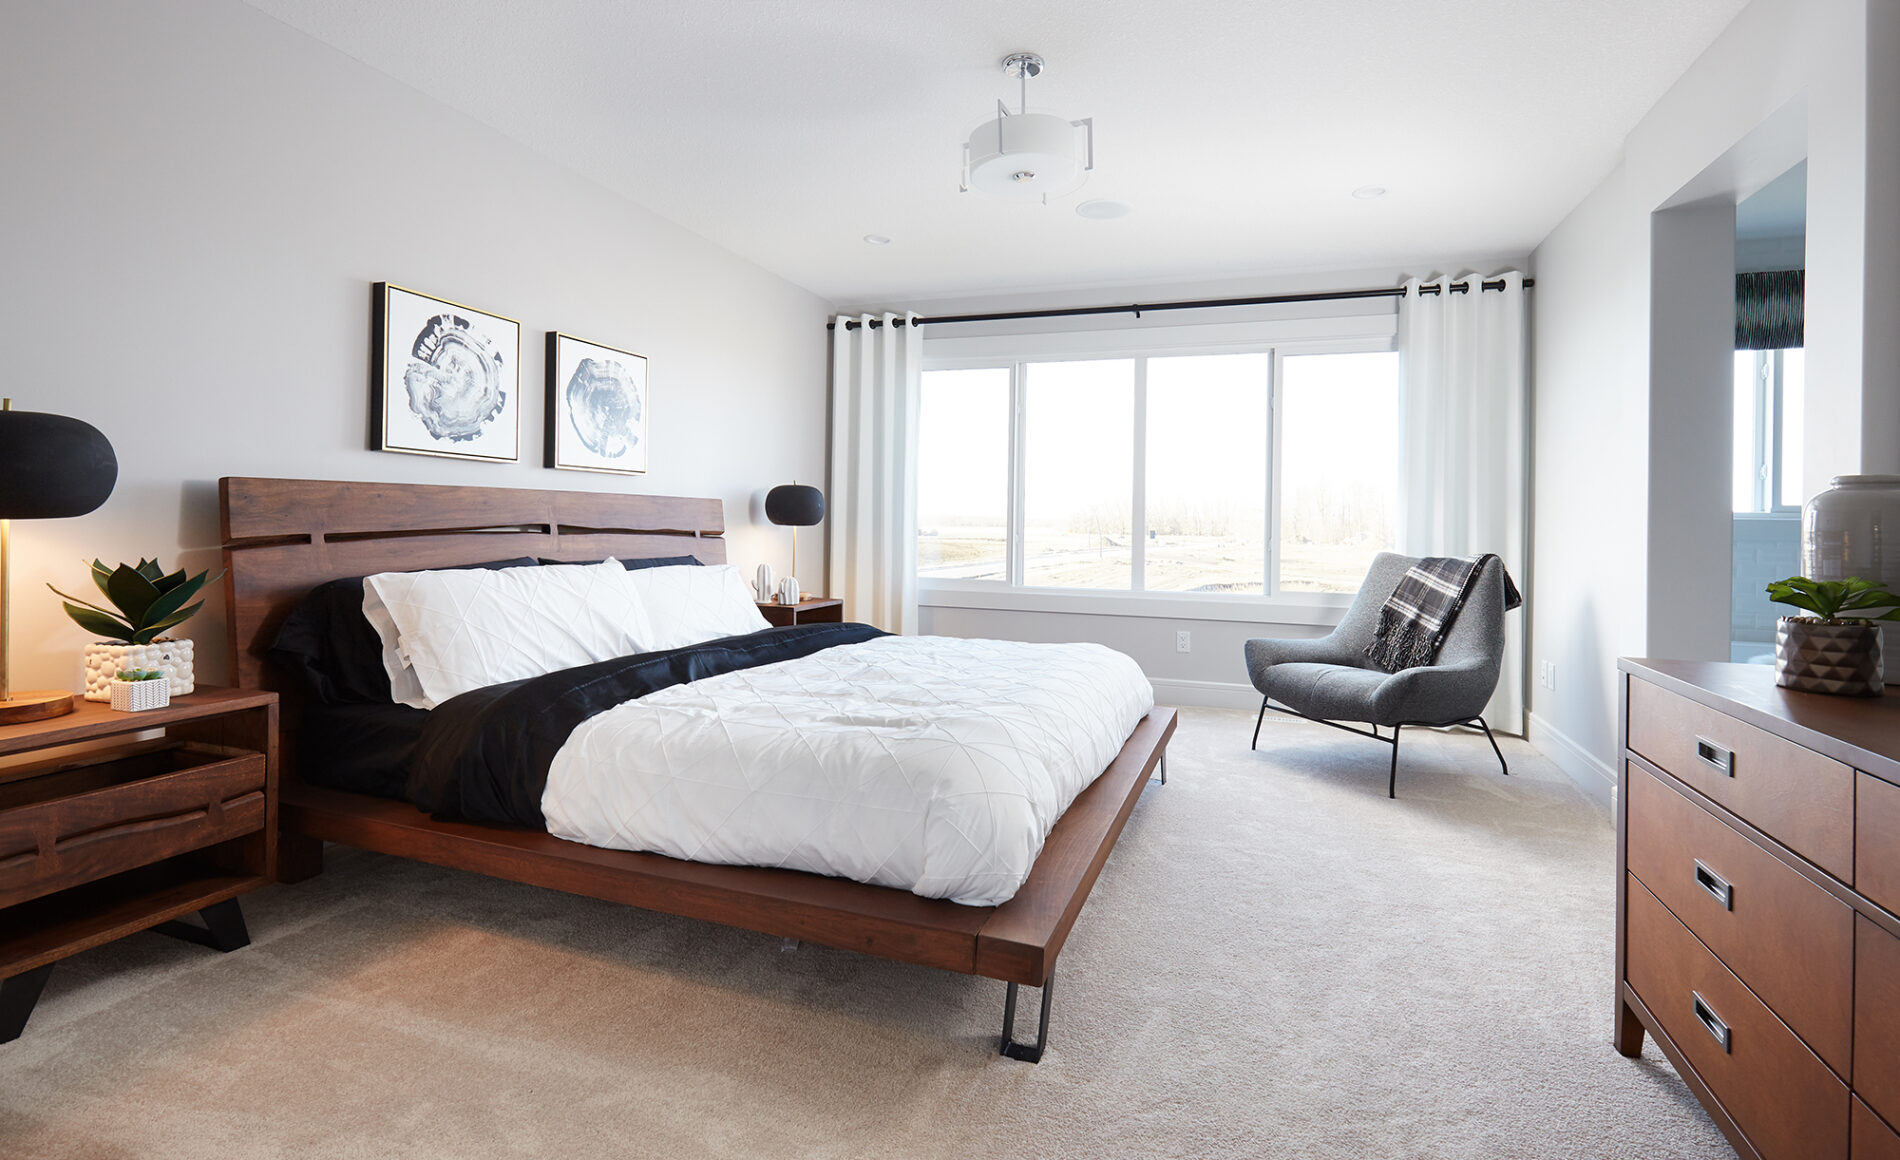 Bright master bedroom with warm wood platform bed, white and black bedding, art above the bed and a chair in the corner in front of large windows at the back of the room